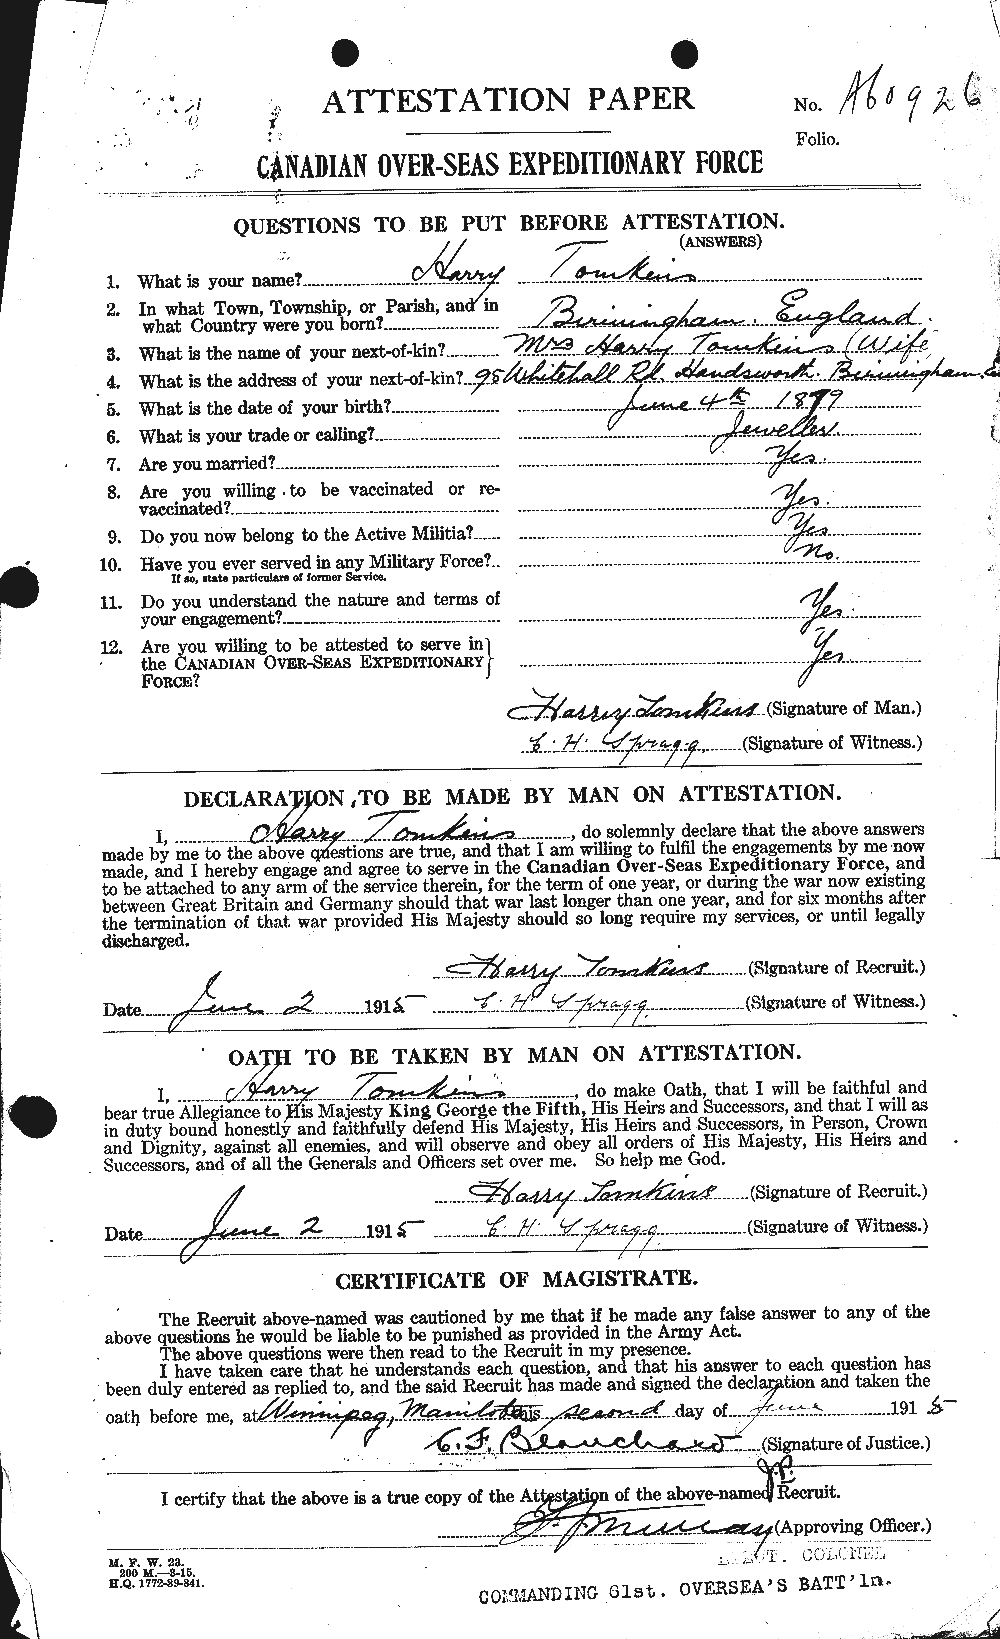 Personnel Records of the First World War - CEF 635401a